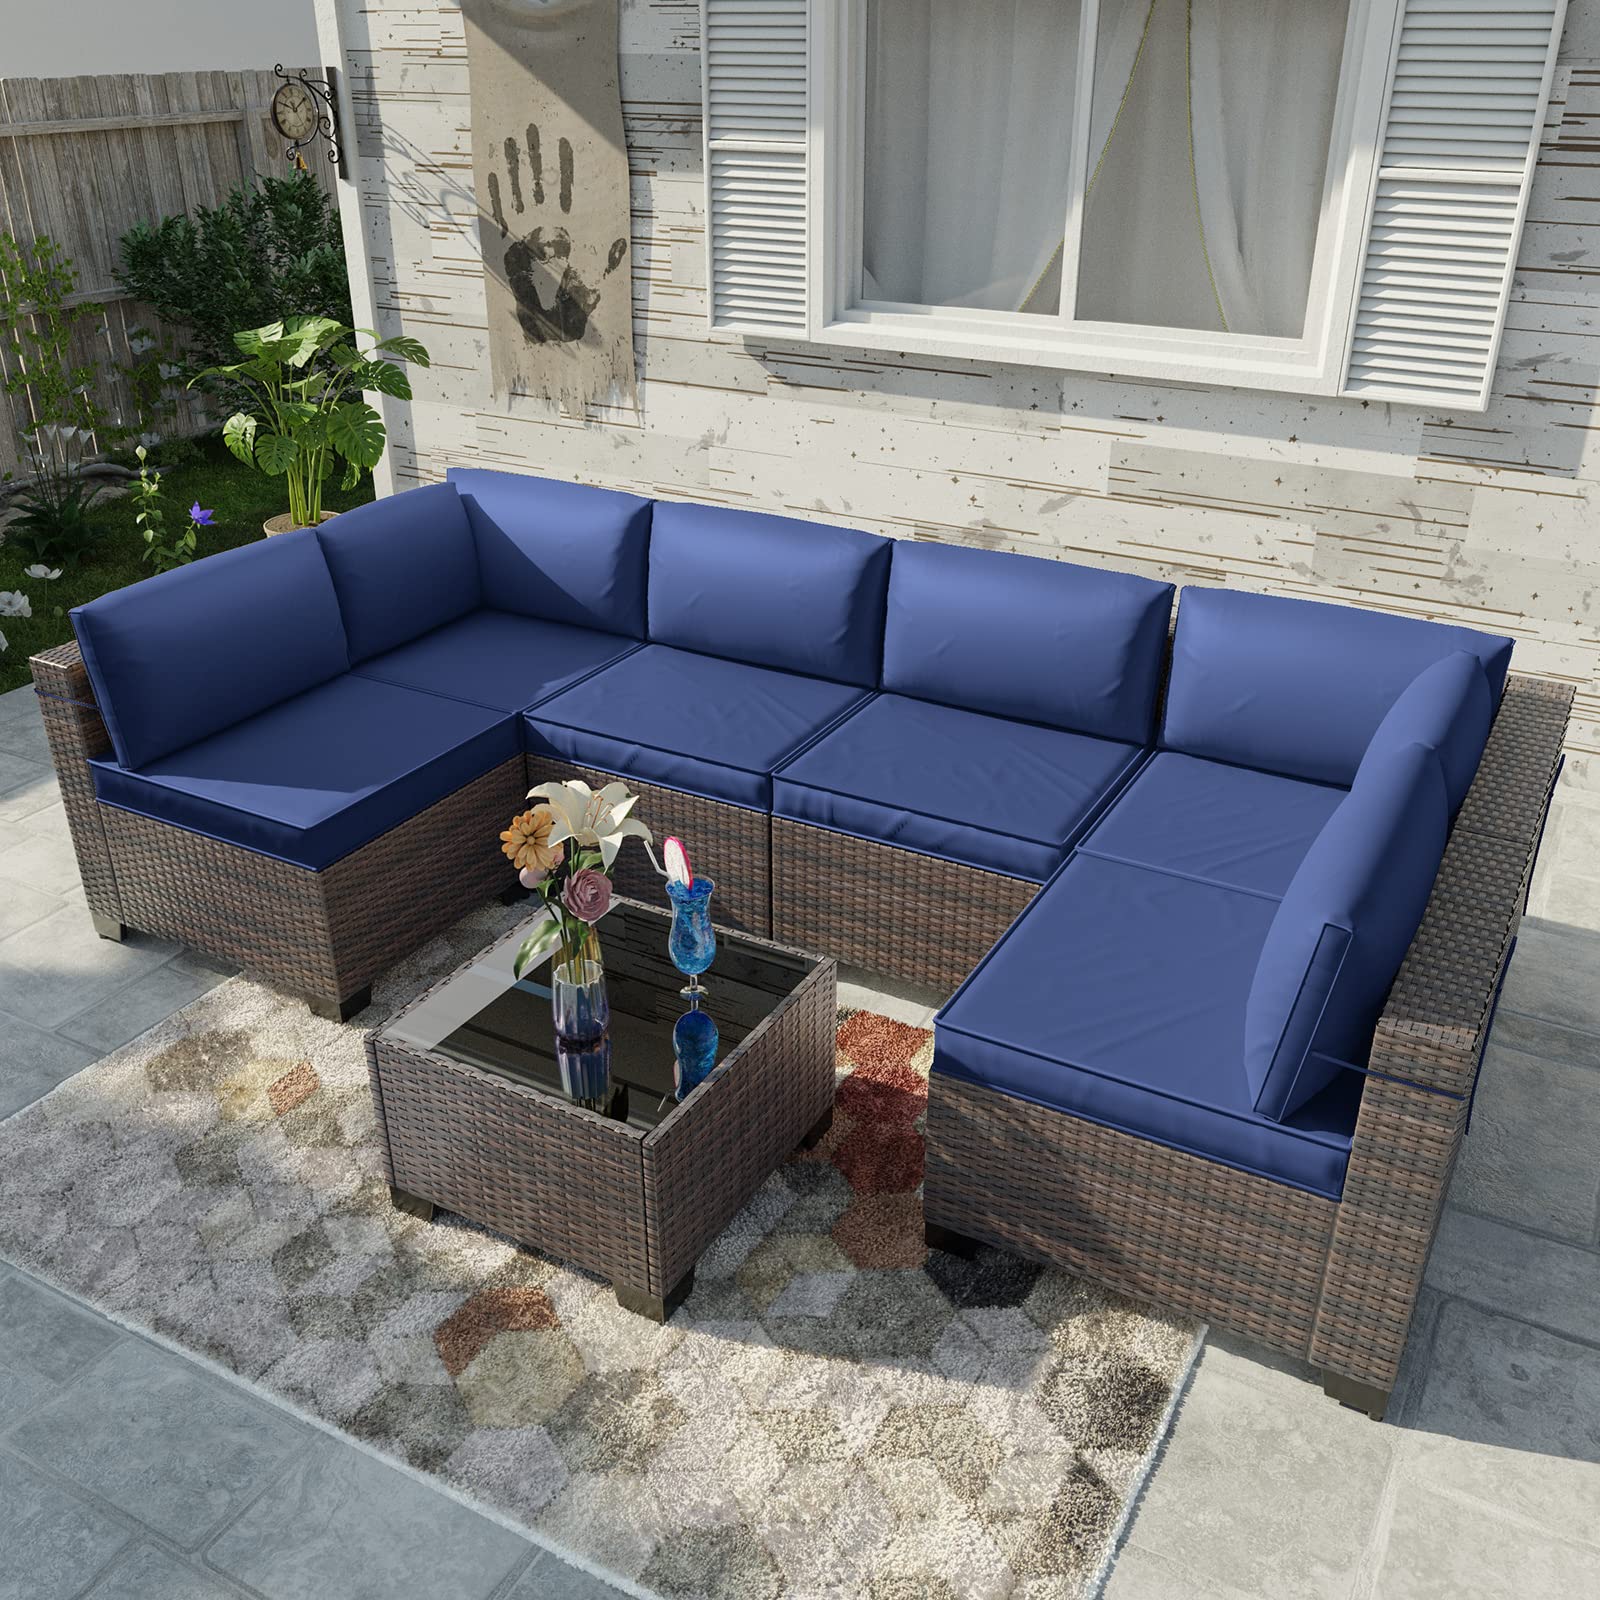 Kullavik 7 Pieces Outdoor Patio Furniture Set Sectional Rattan Sofa Brown Manual Wicker Patio Conversation Set with Navy Blue Cushions,1 Tempered Glass Tea Table and Cushions Covers